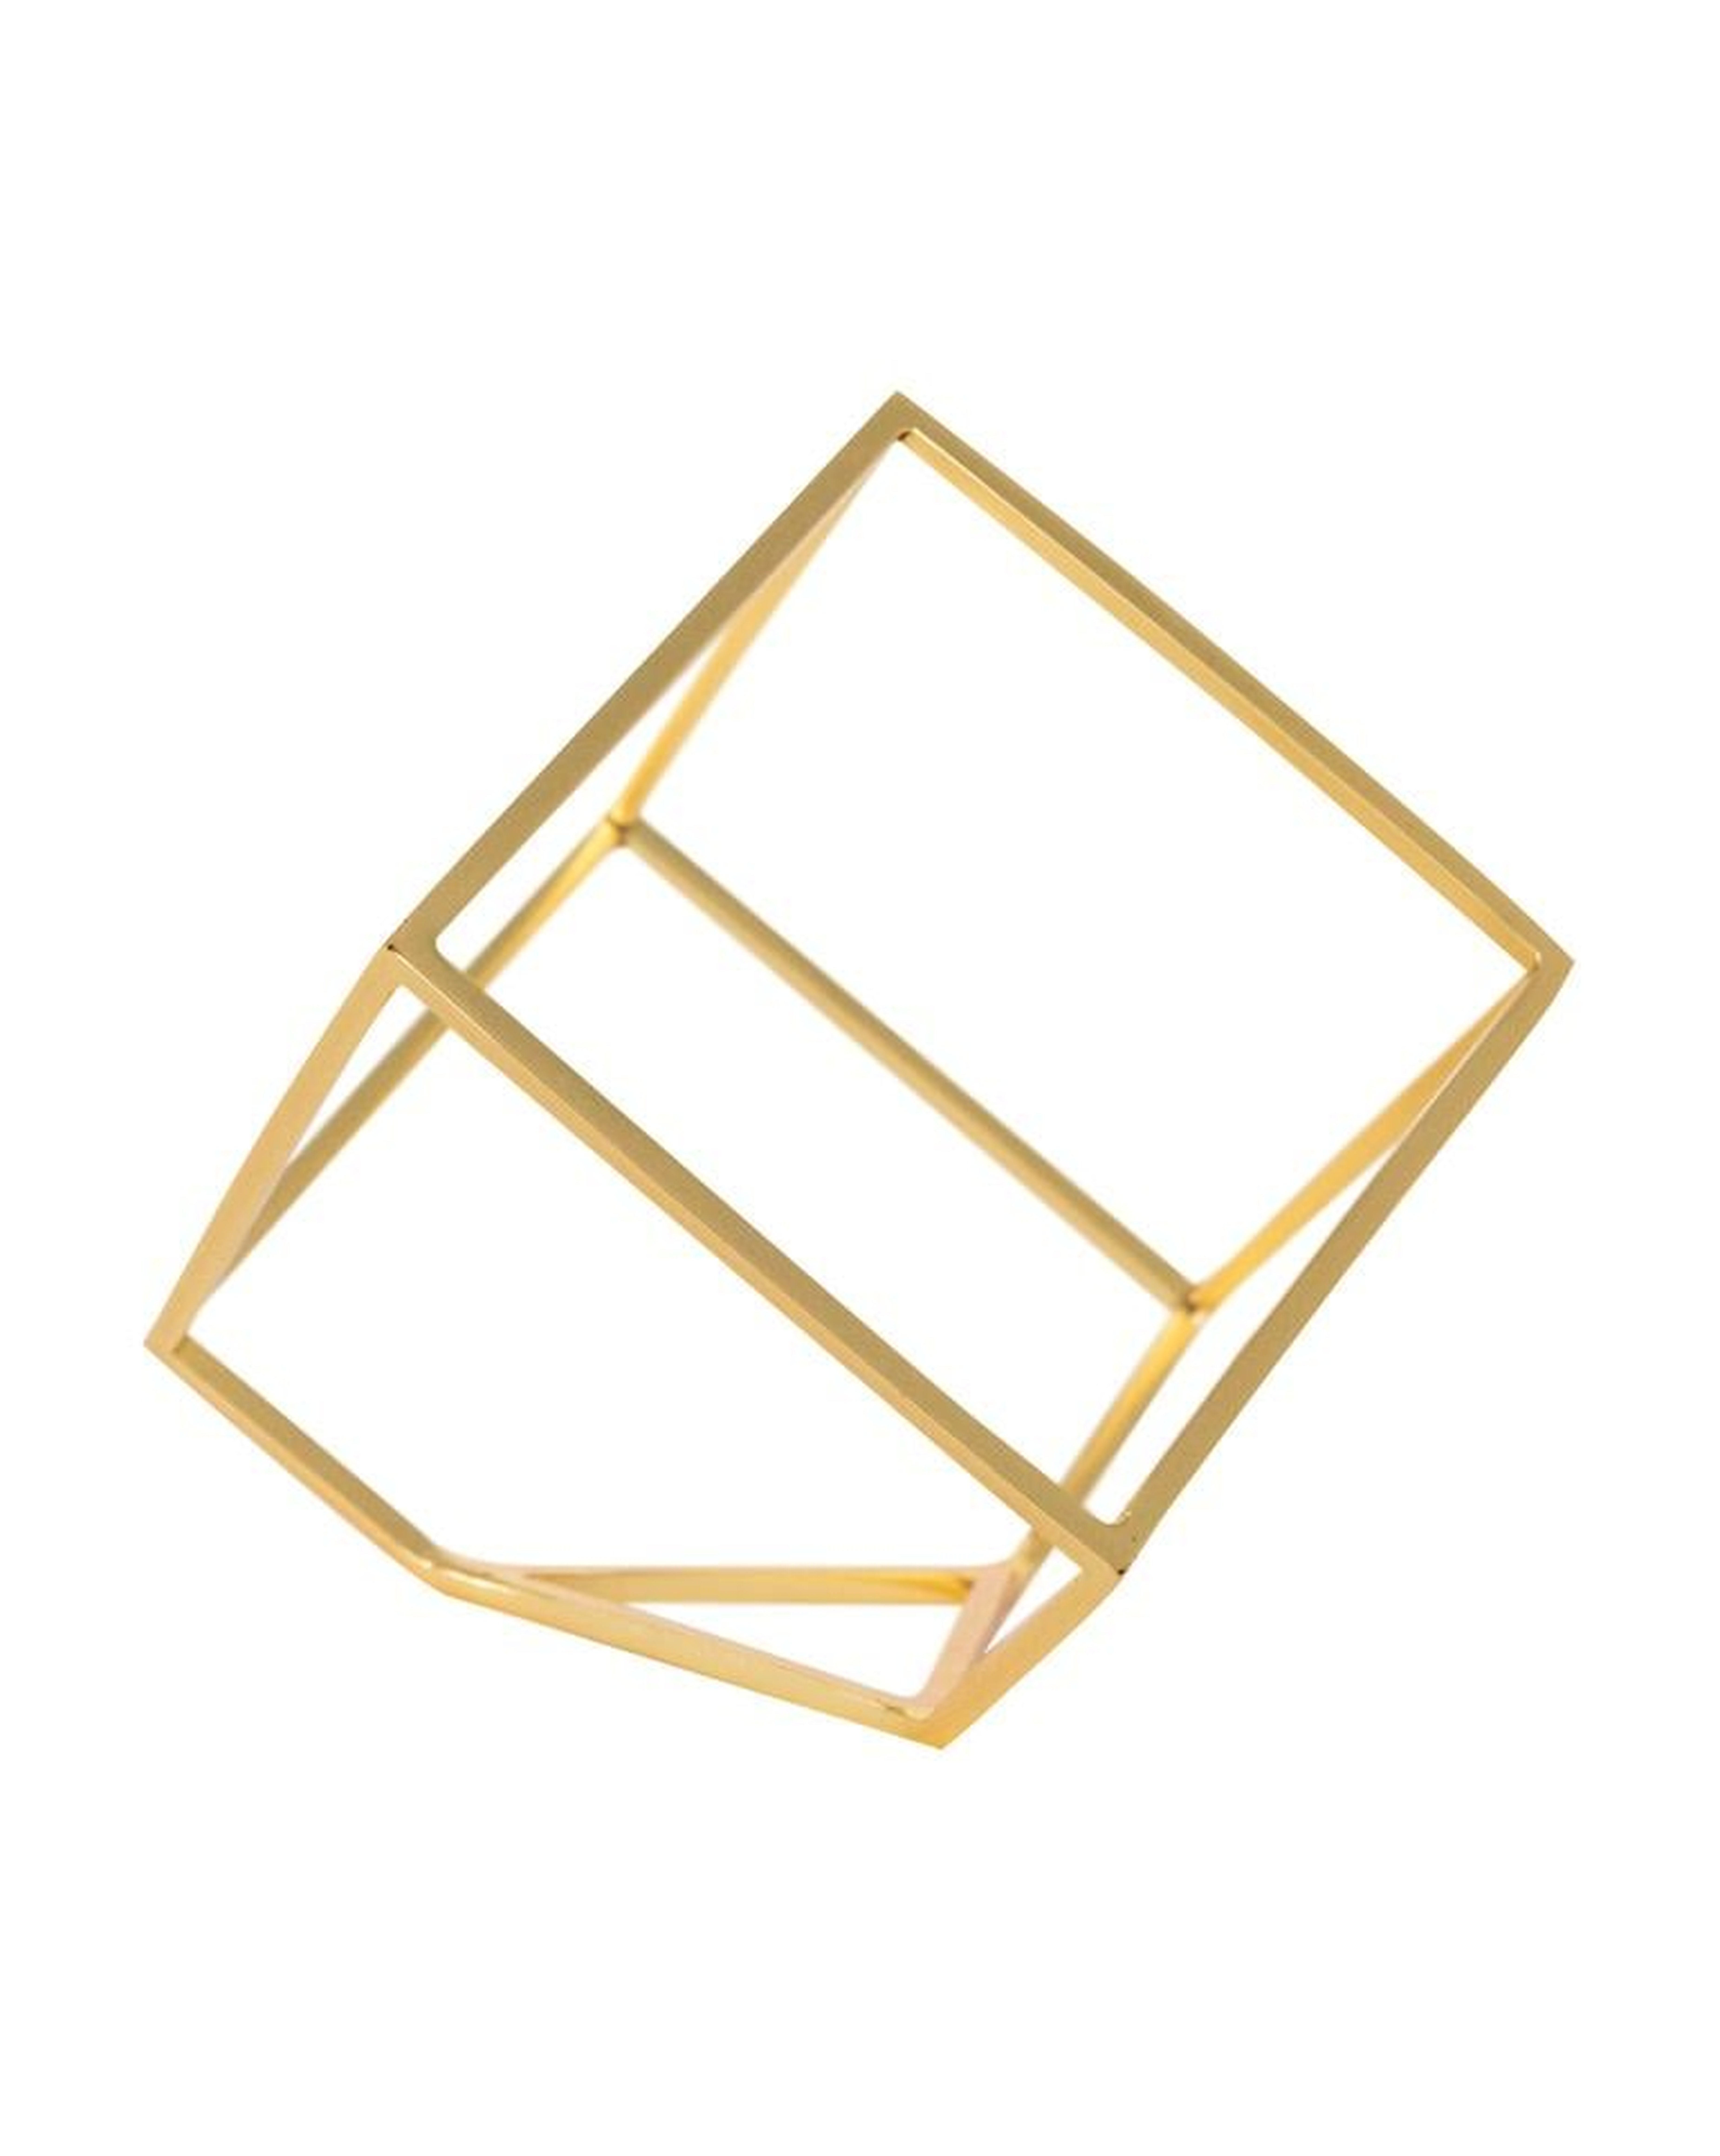 OPEN CUBE OBJECT - GOLD - McGee & Co.